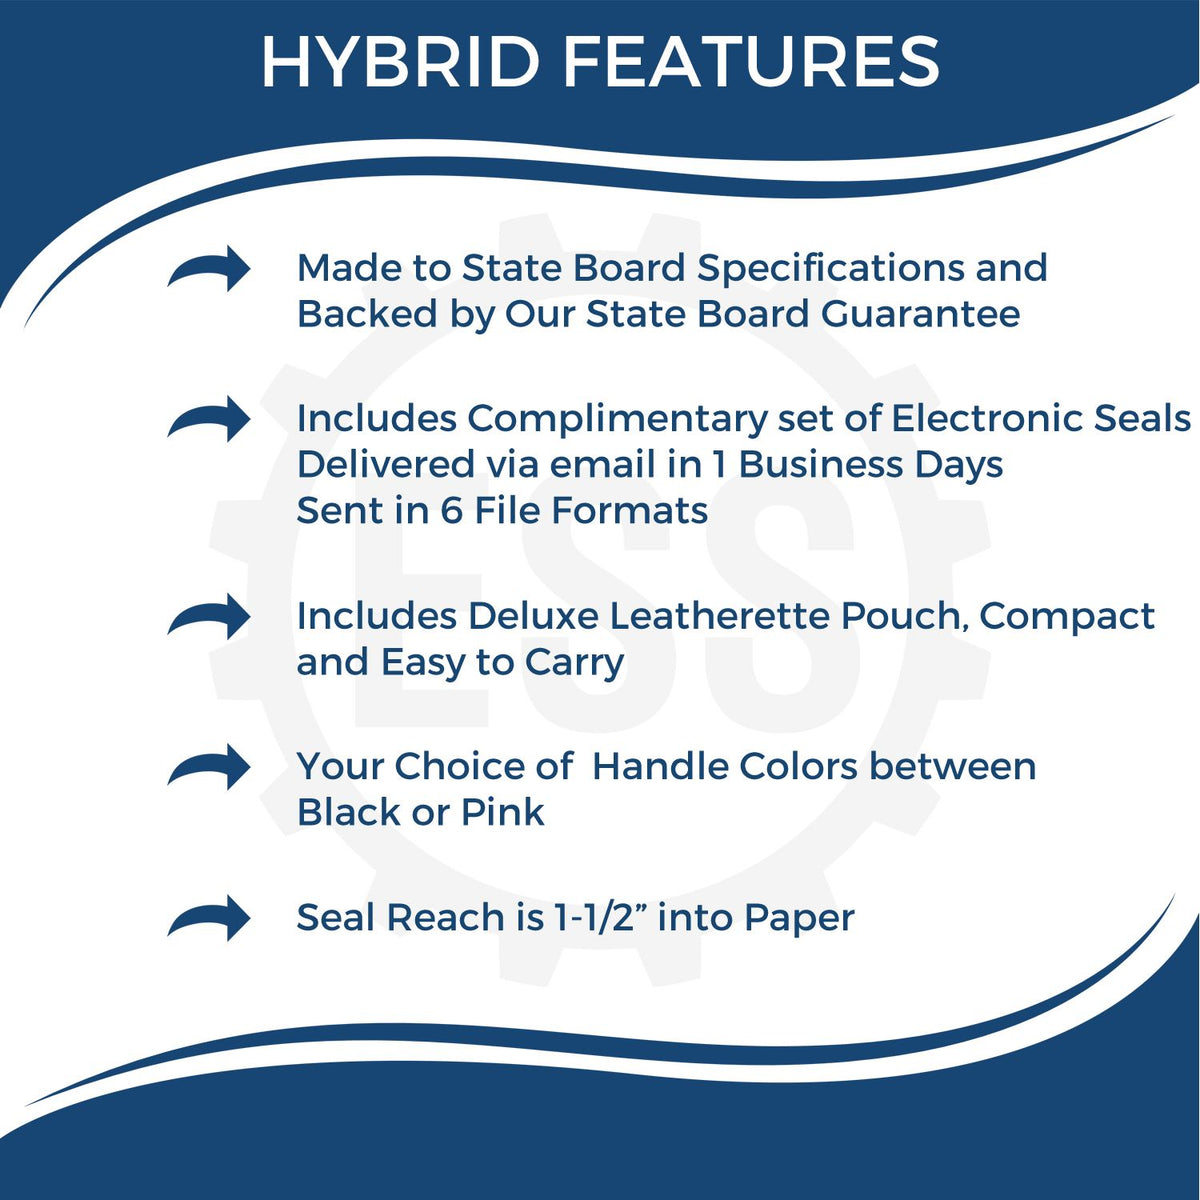 A picture of an infographic highlighting the selling points for the Hybrid Colorado Land Surveyor Seal